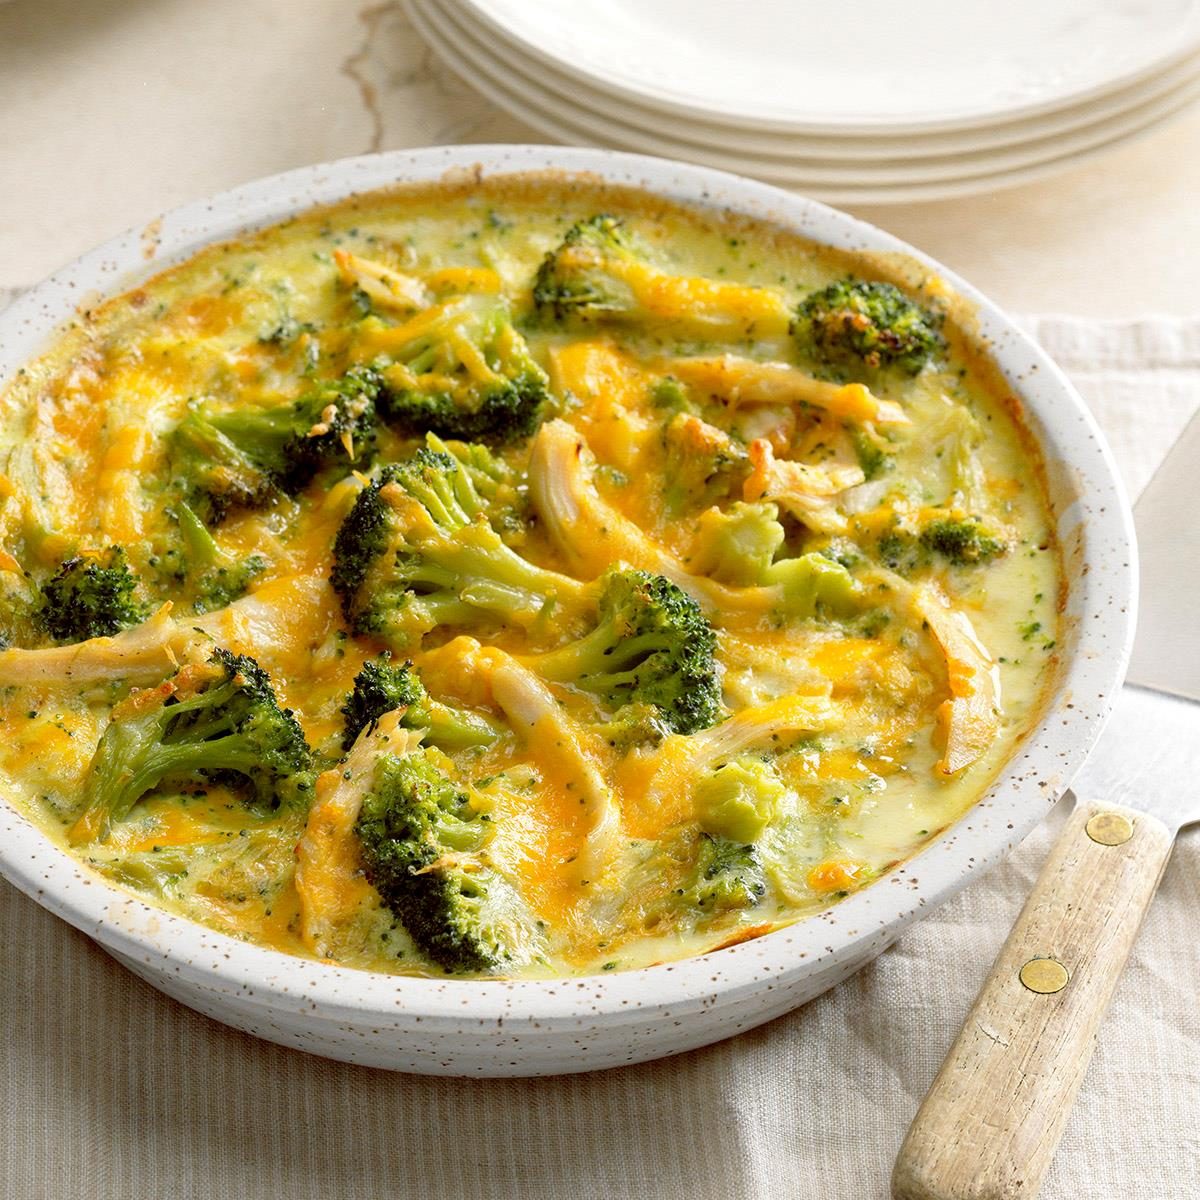 Light Chicken and Broccoli Bake Recipe: How to Make It